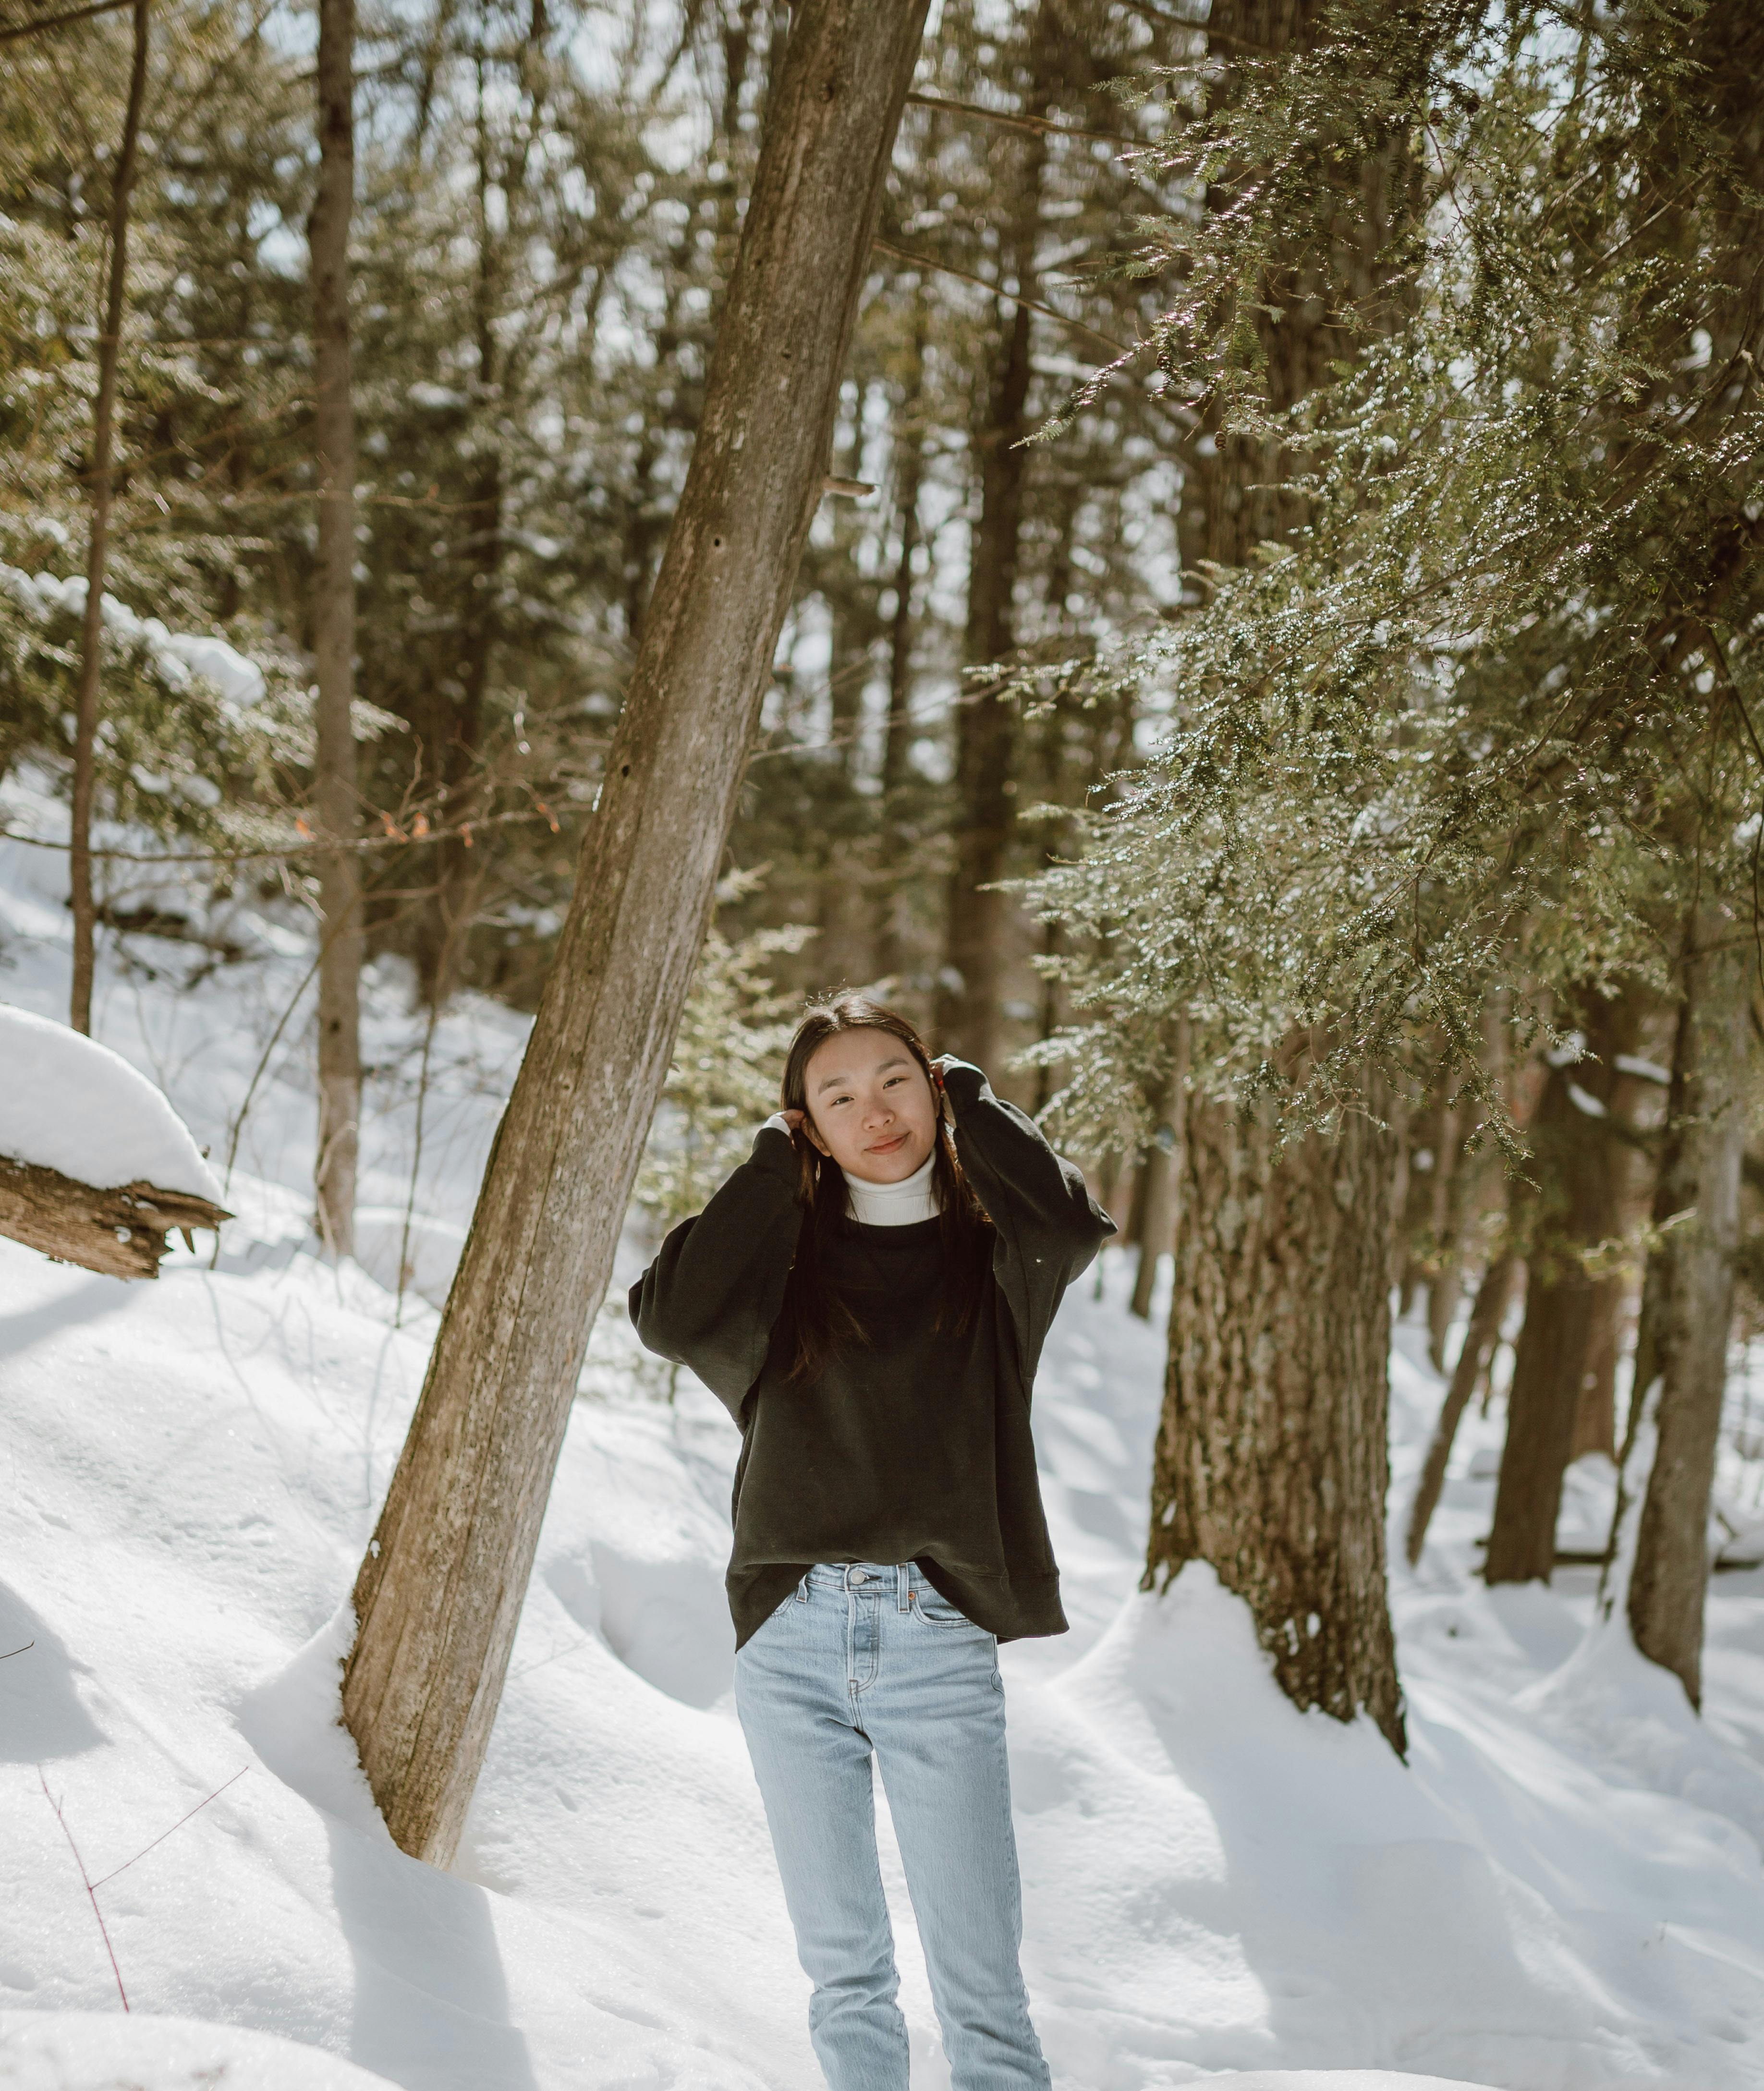 Smiling female walking on road among snowy forest · Free Stock Photo